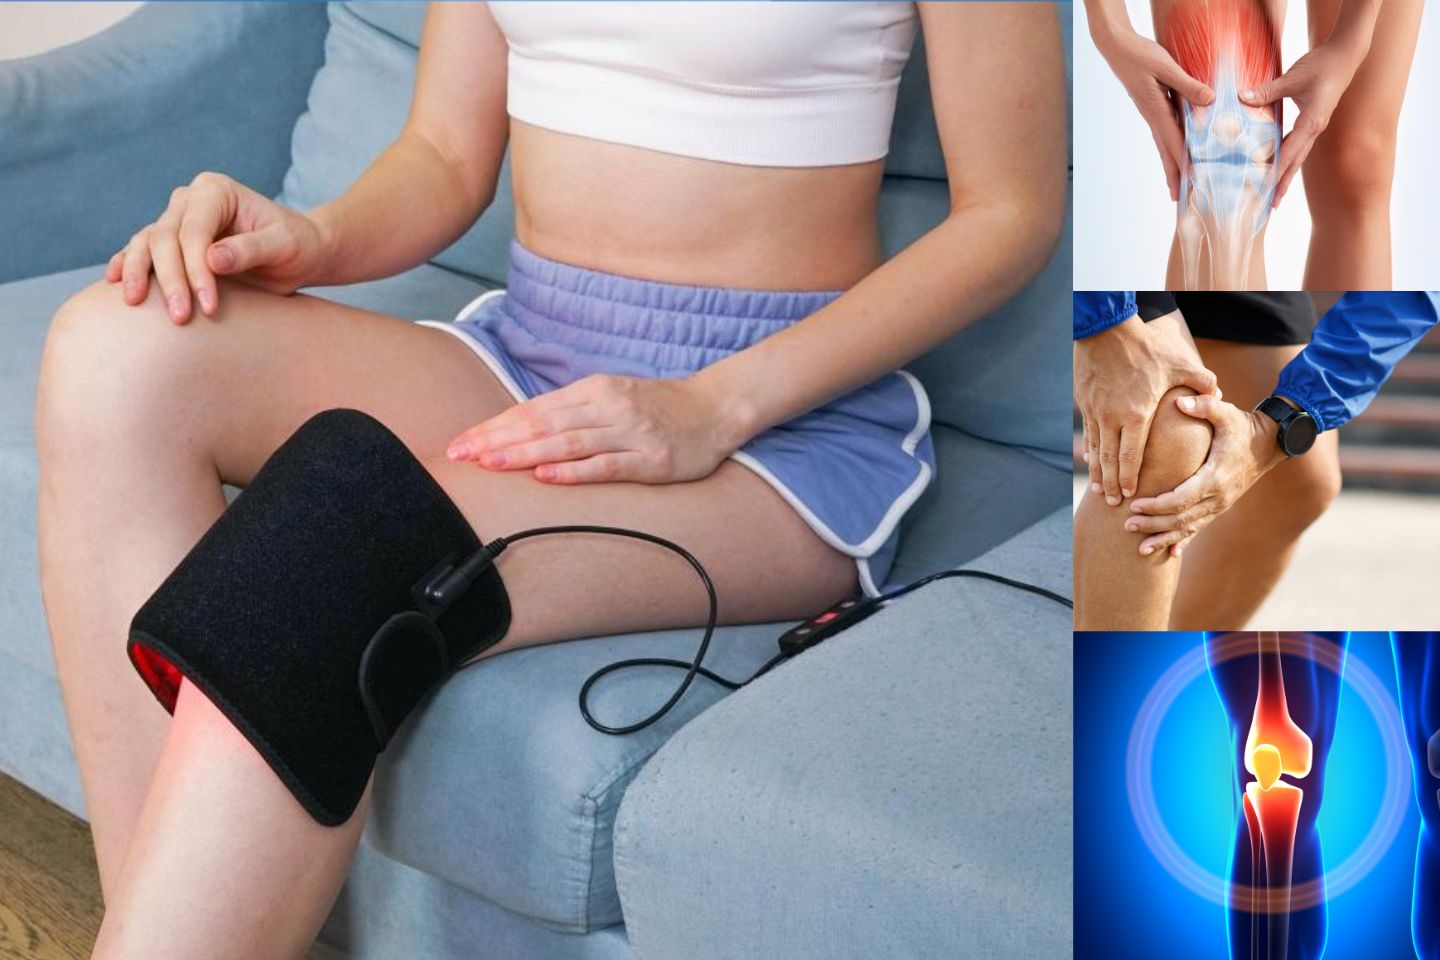 Heated Knee Brace Knee Heating Pad for Arthritis Pain Relief, 3 Temperature  Control Thermal Therapy